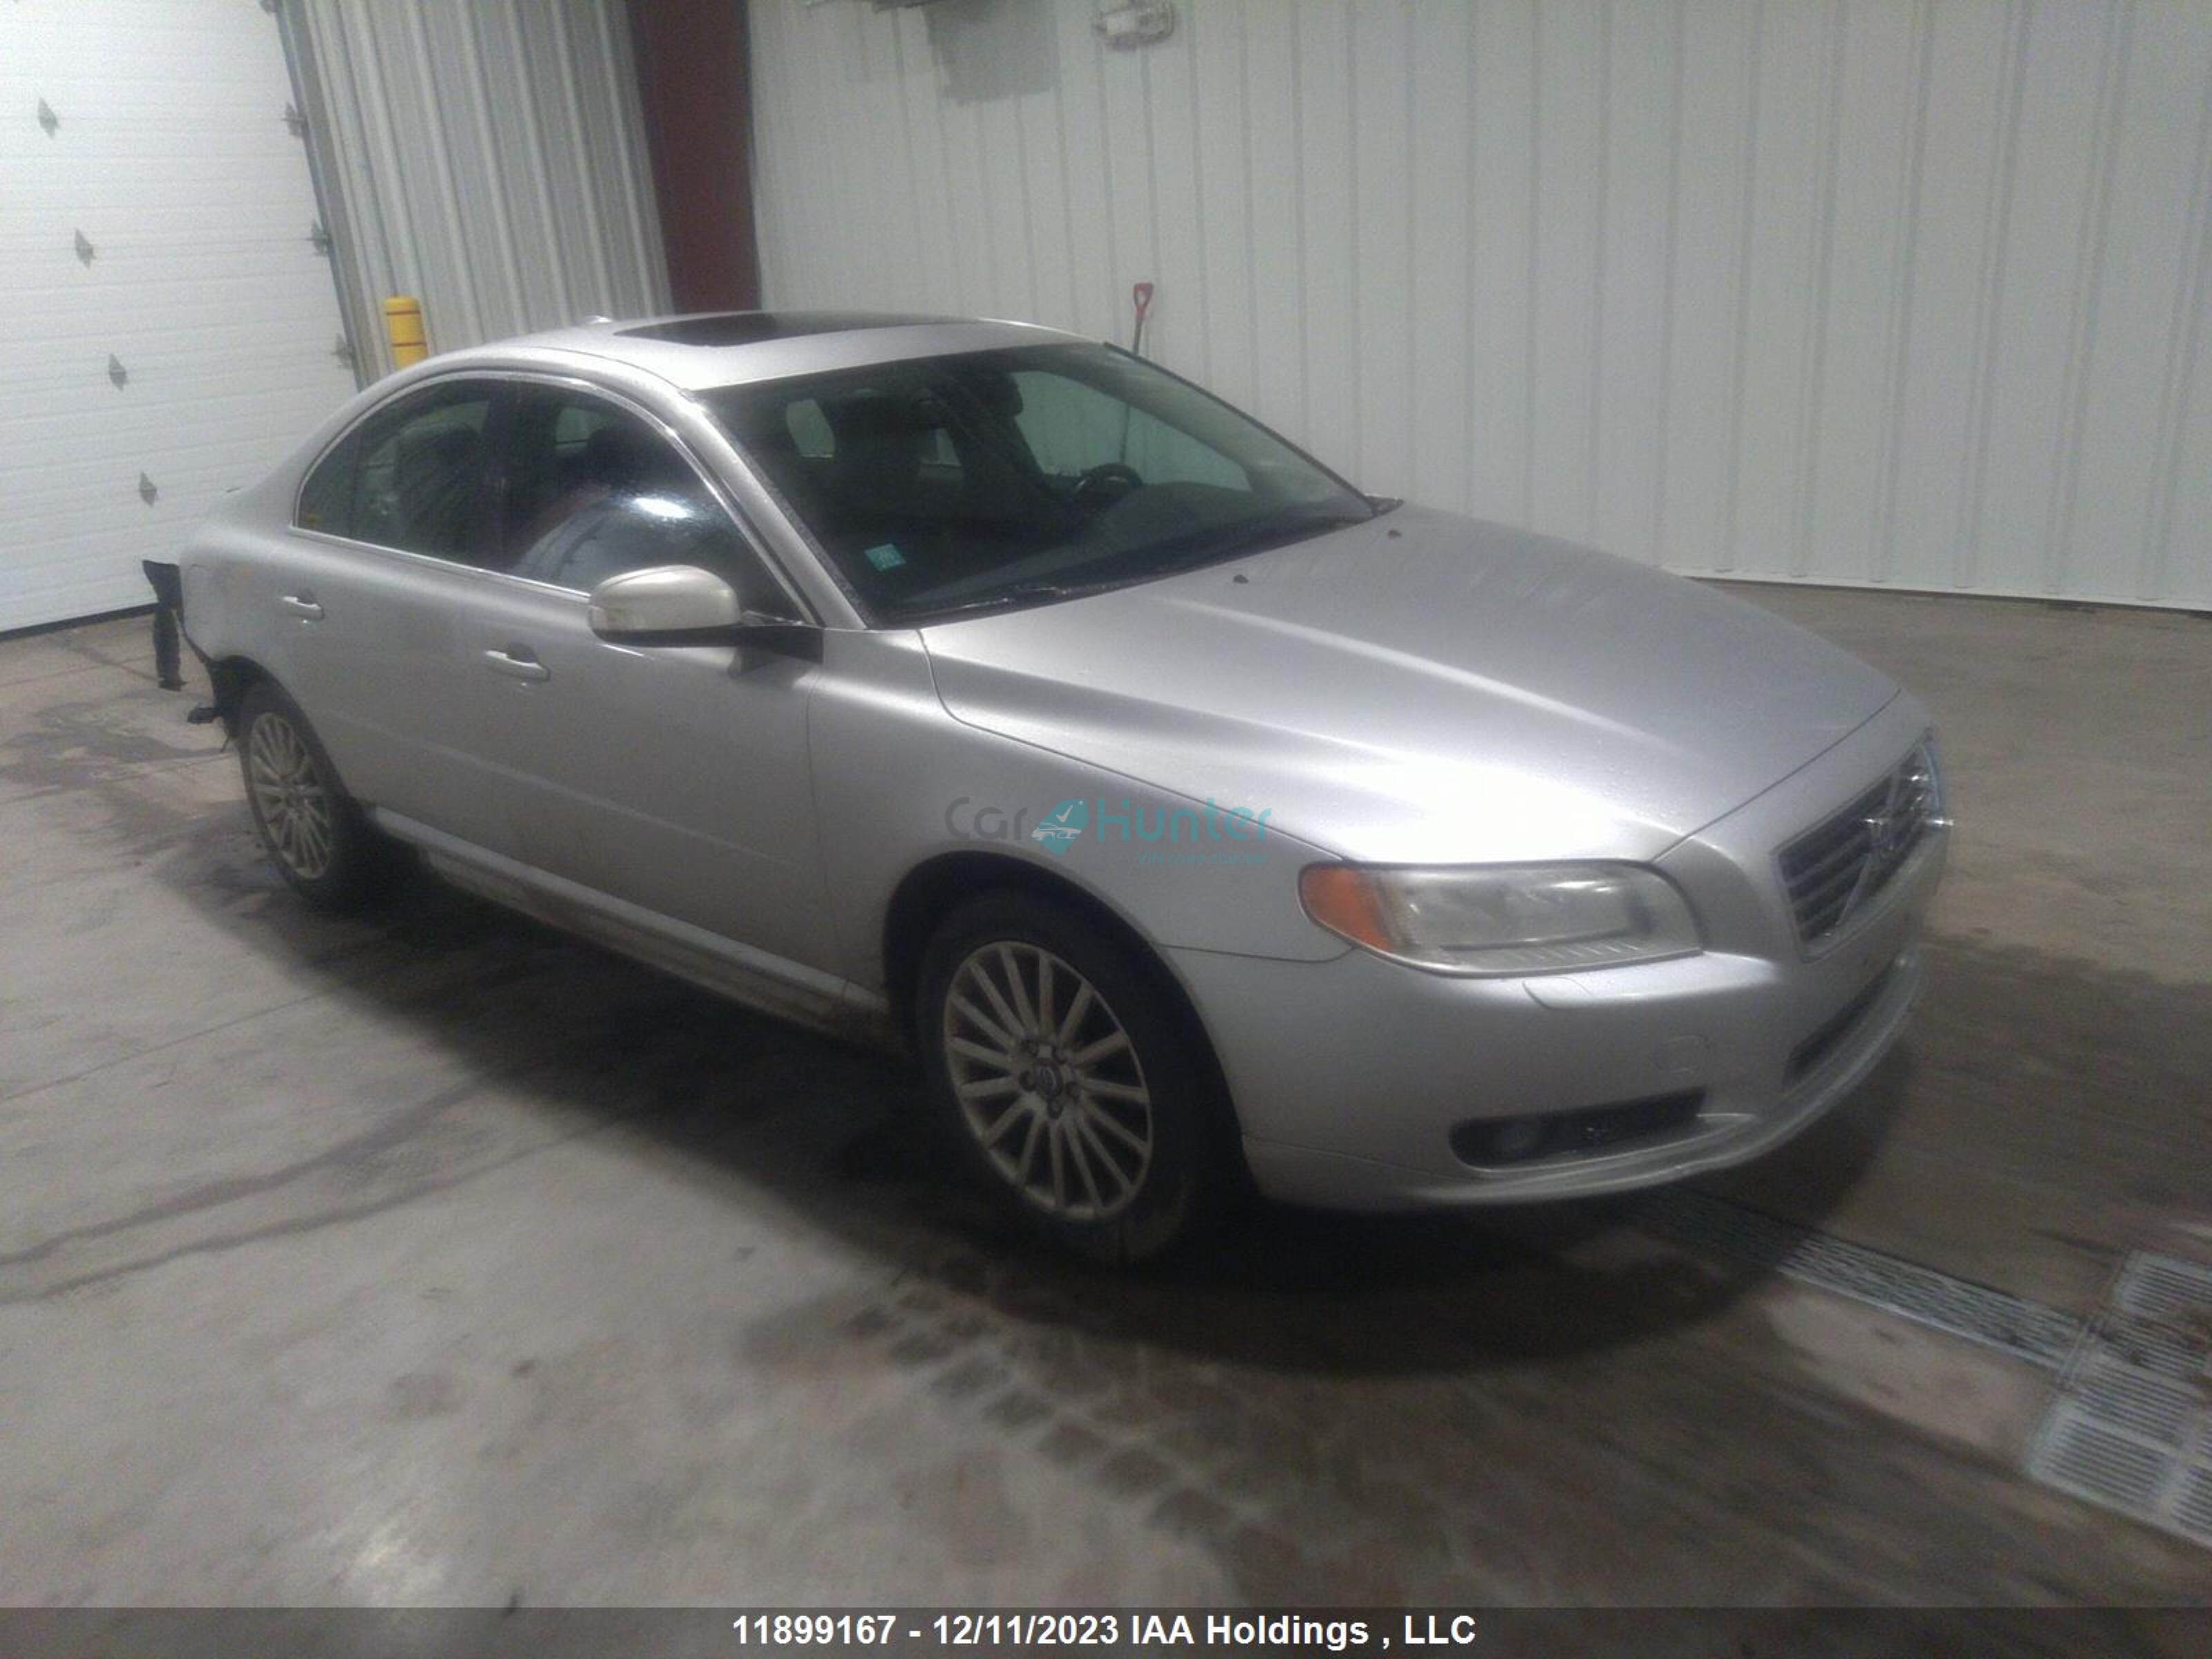 volvo s80 2008 yv1as982981078897